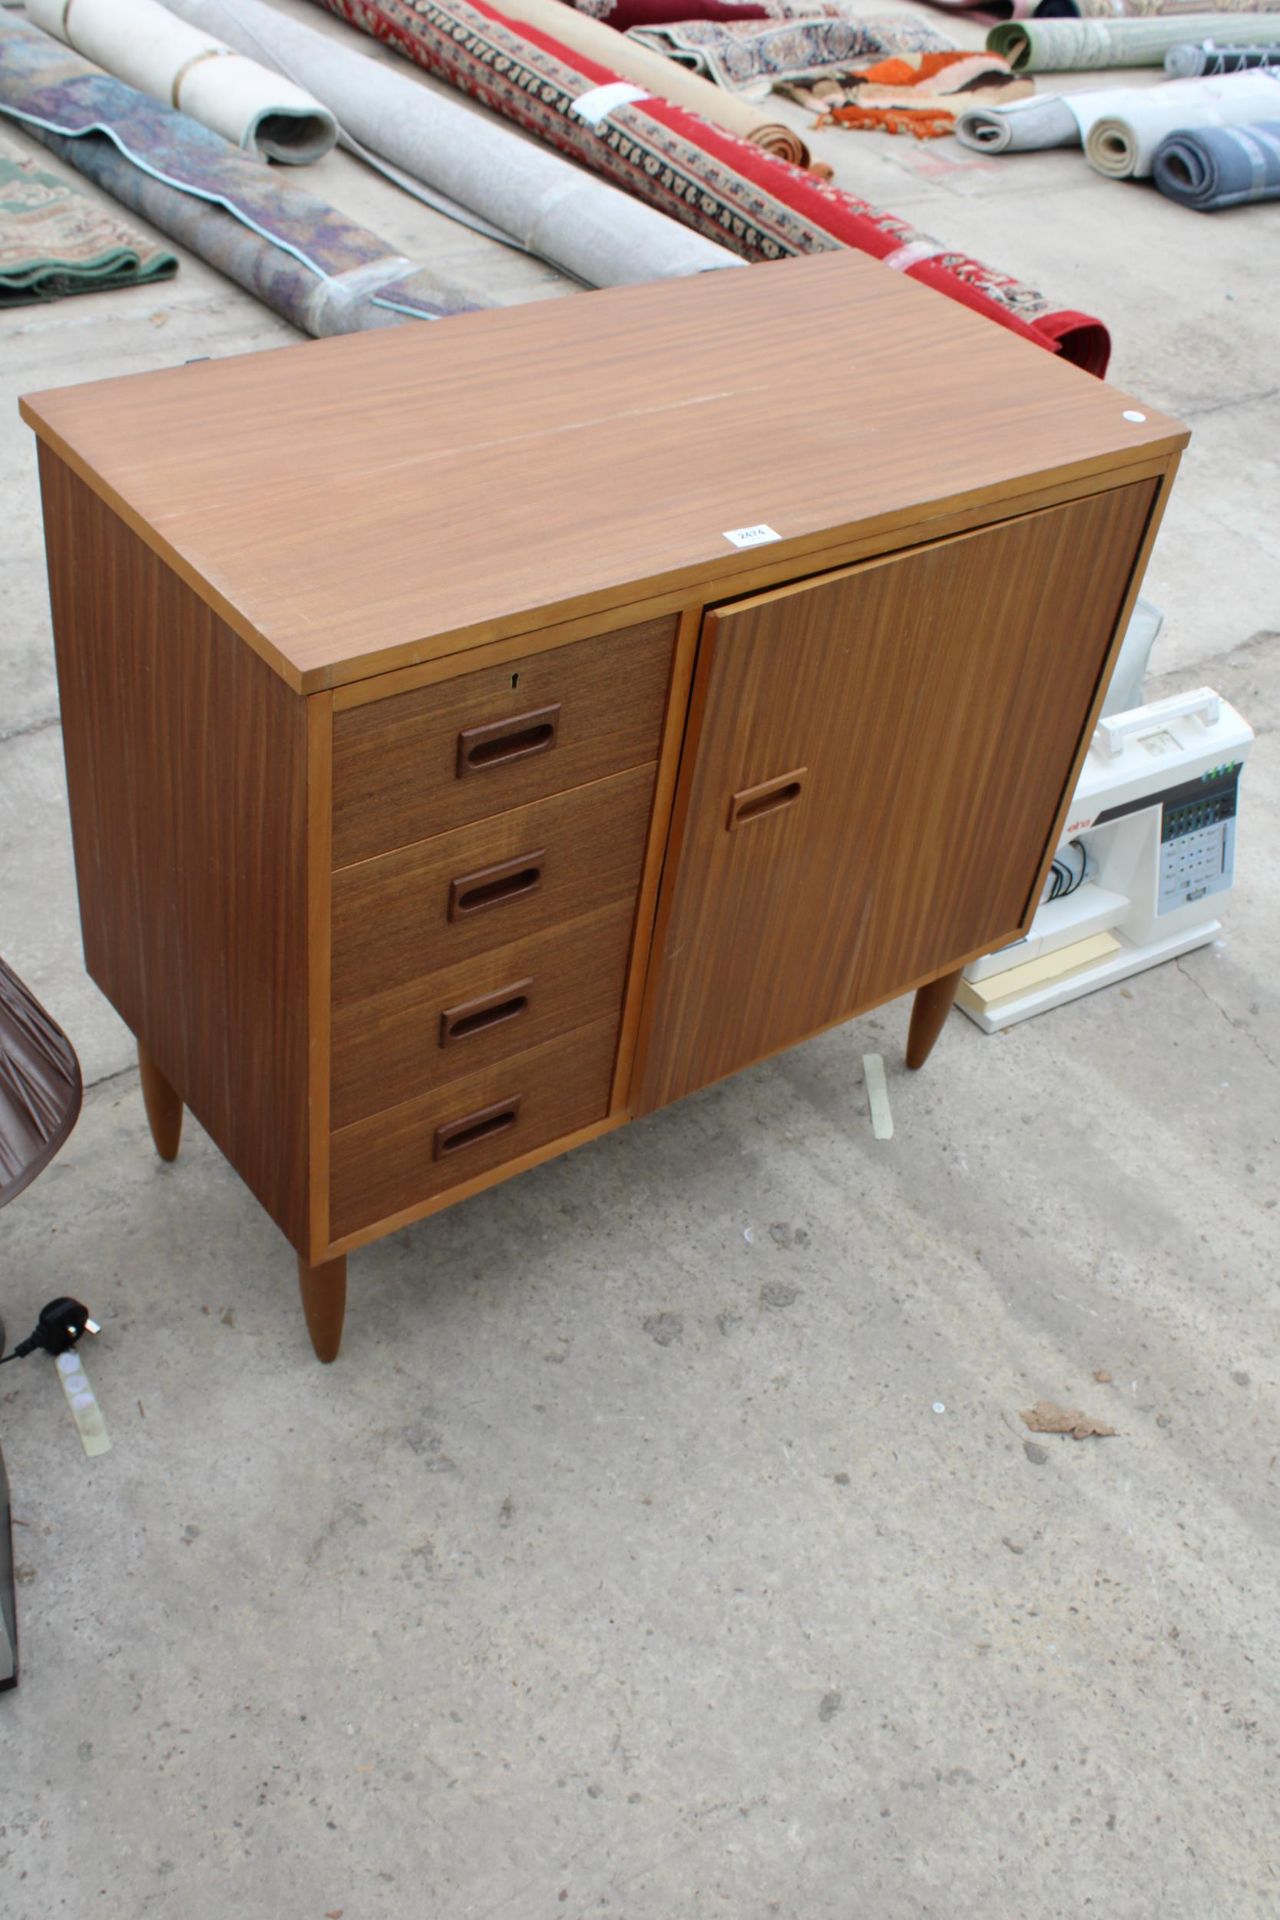 A RETRO TEAK SEWING CABINET WITH ELECTRIC SINGER SEWING MACHINE AND ACCESSORIES - Bild 5 aus 5